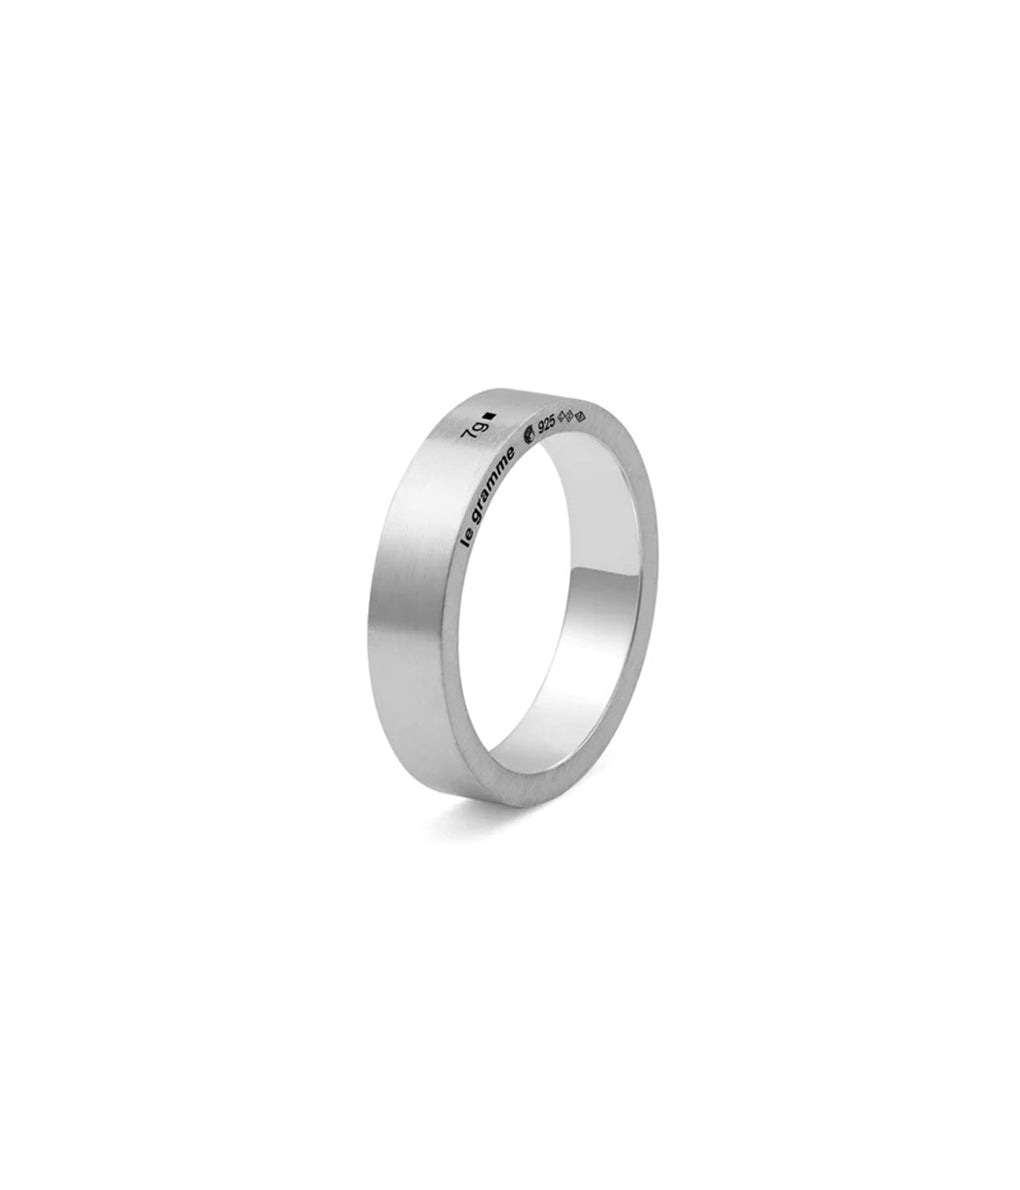 LE GRAMME "7G RIBBON RING BRUSHED"（NEW)